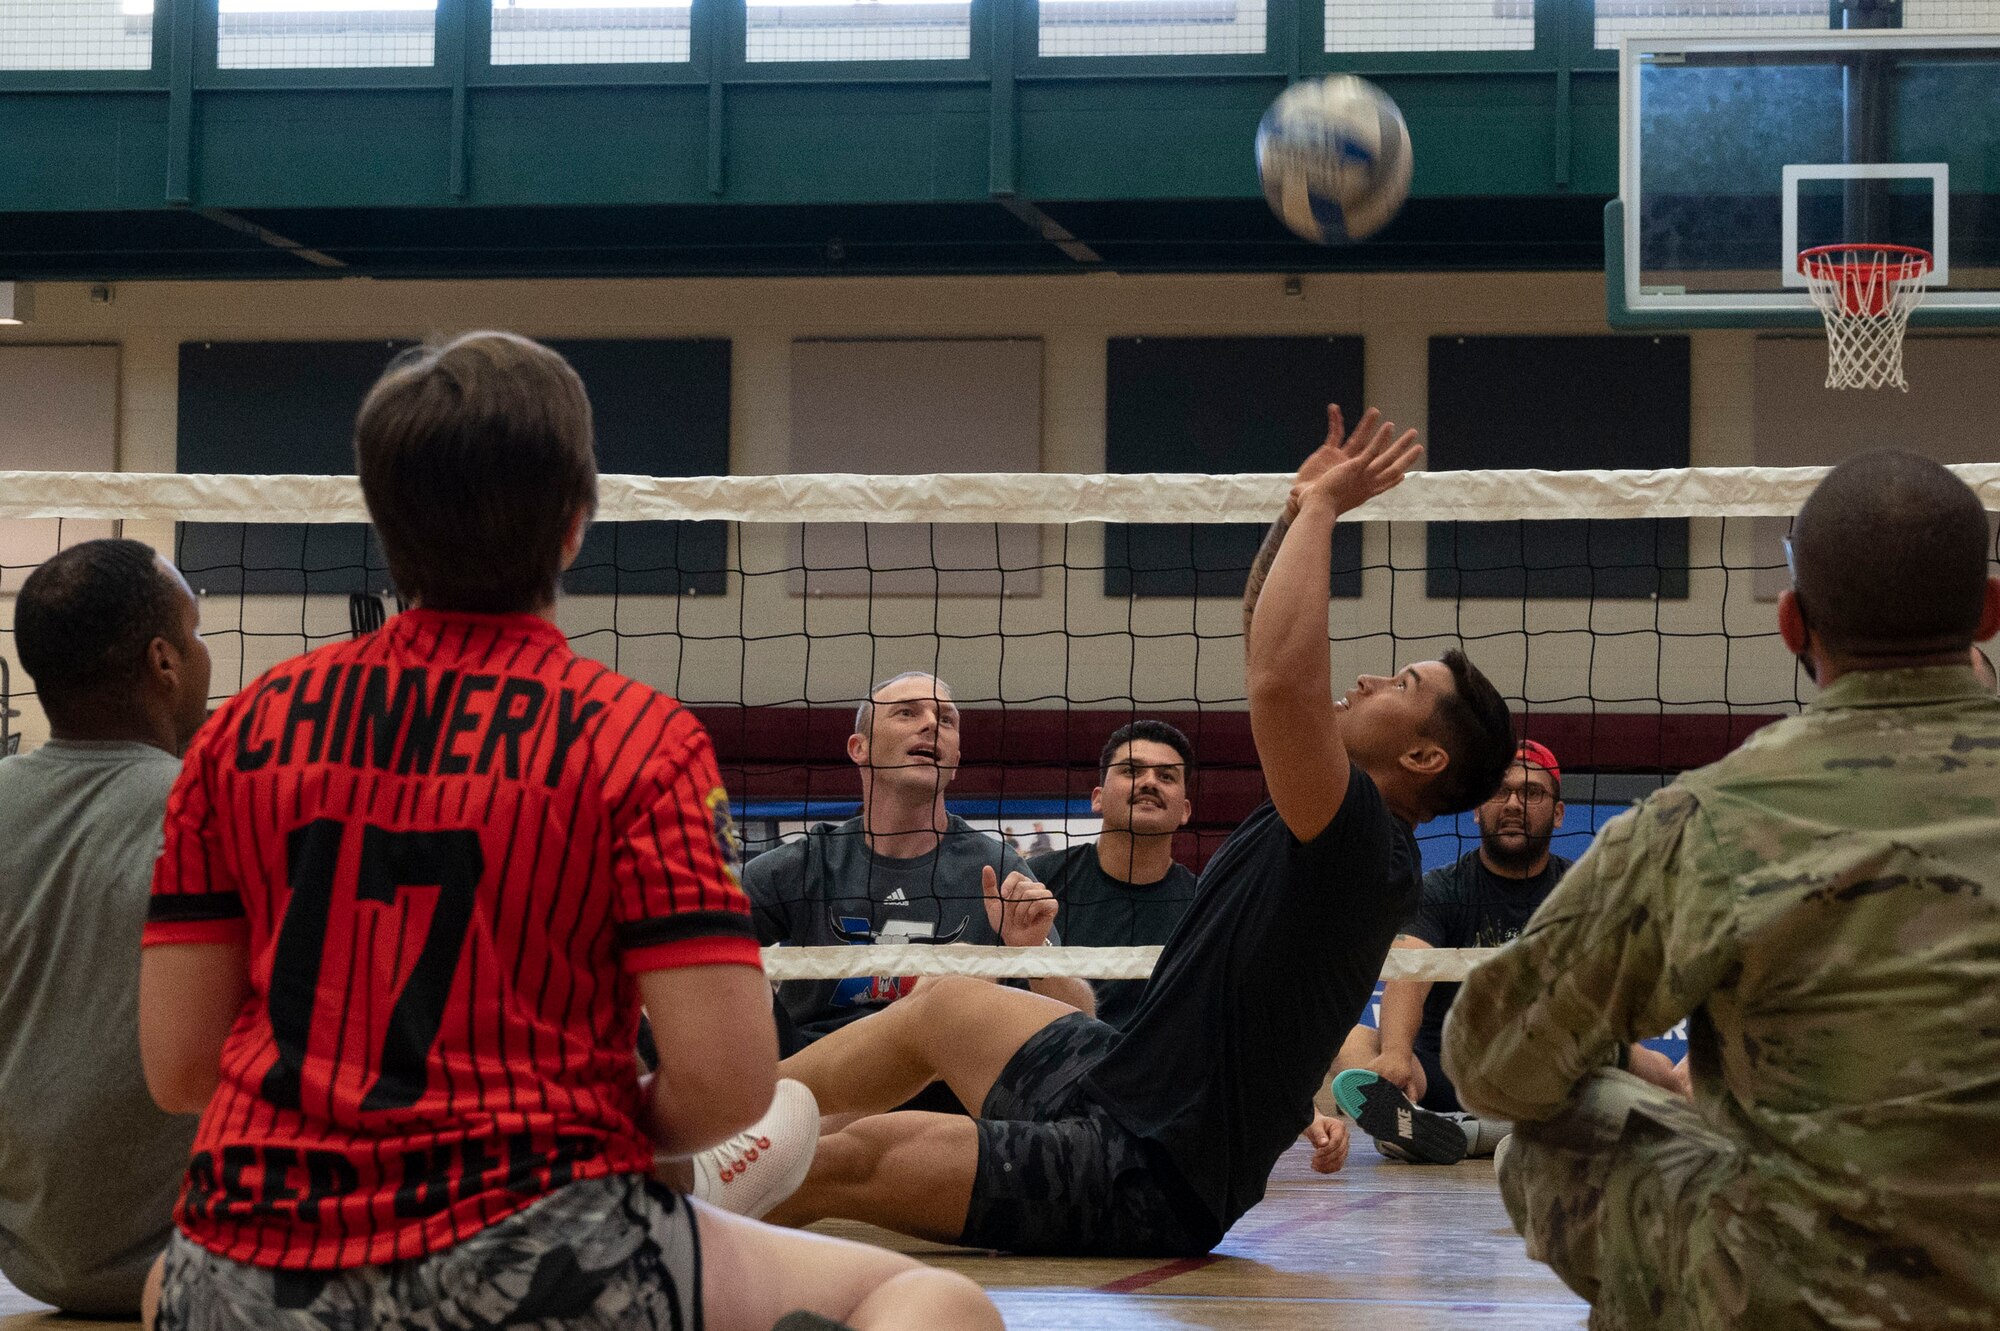 U.S. Air Force SrA Jude Cruz, 47th Operations Support Squadron aerospace physiology
technician, hits a volleyball into the air during an Air Force Wounded Warrior Program (AFW2) hosted
sitting-volleyball tournament at Laughlin Air Force Base, Texas, June 15, 2022. The AFW2 Program is a
Congressionally-mandated and Federally-funded organization tasked with taking care of U.S. Air Force
wounded, ill, and injured Airmen, Veterans, and their families. (U.S. Air Force photo by Airman 1st Class
Kailee Reynolds)